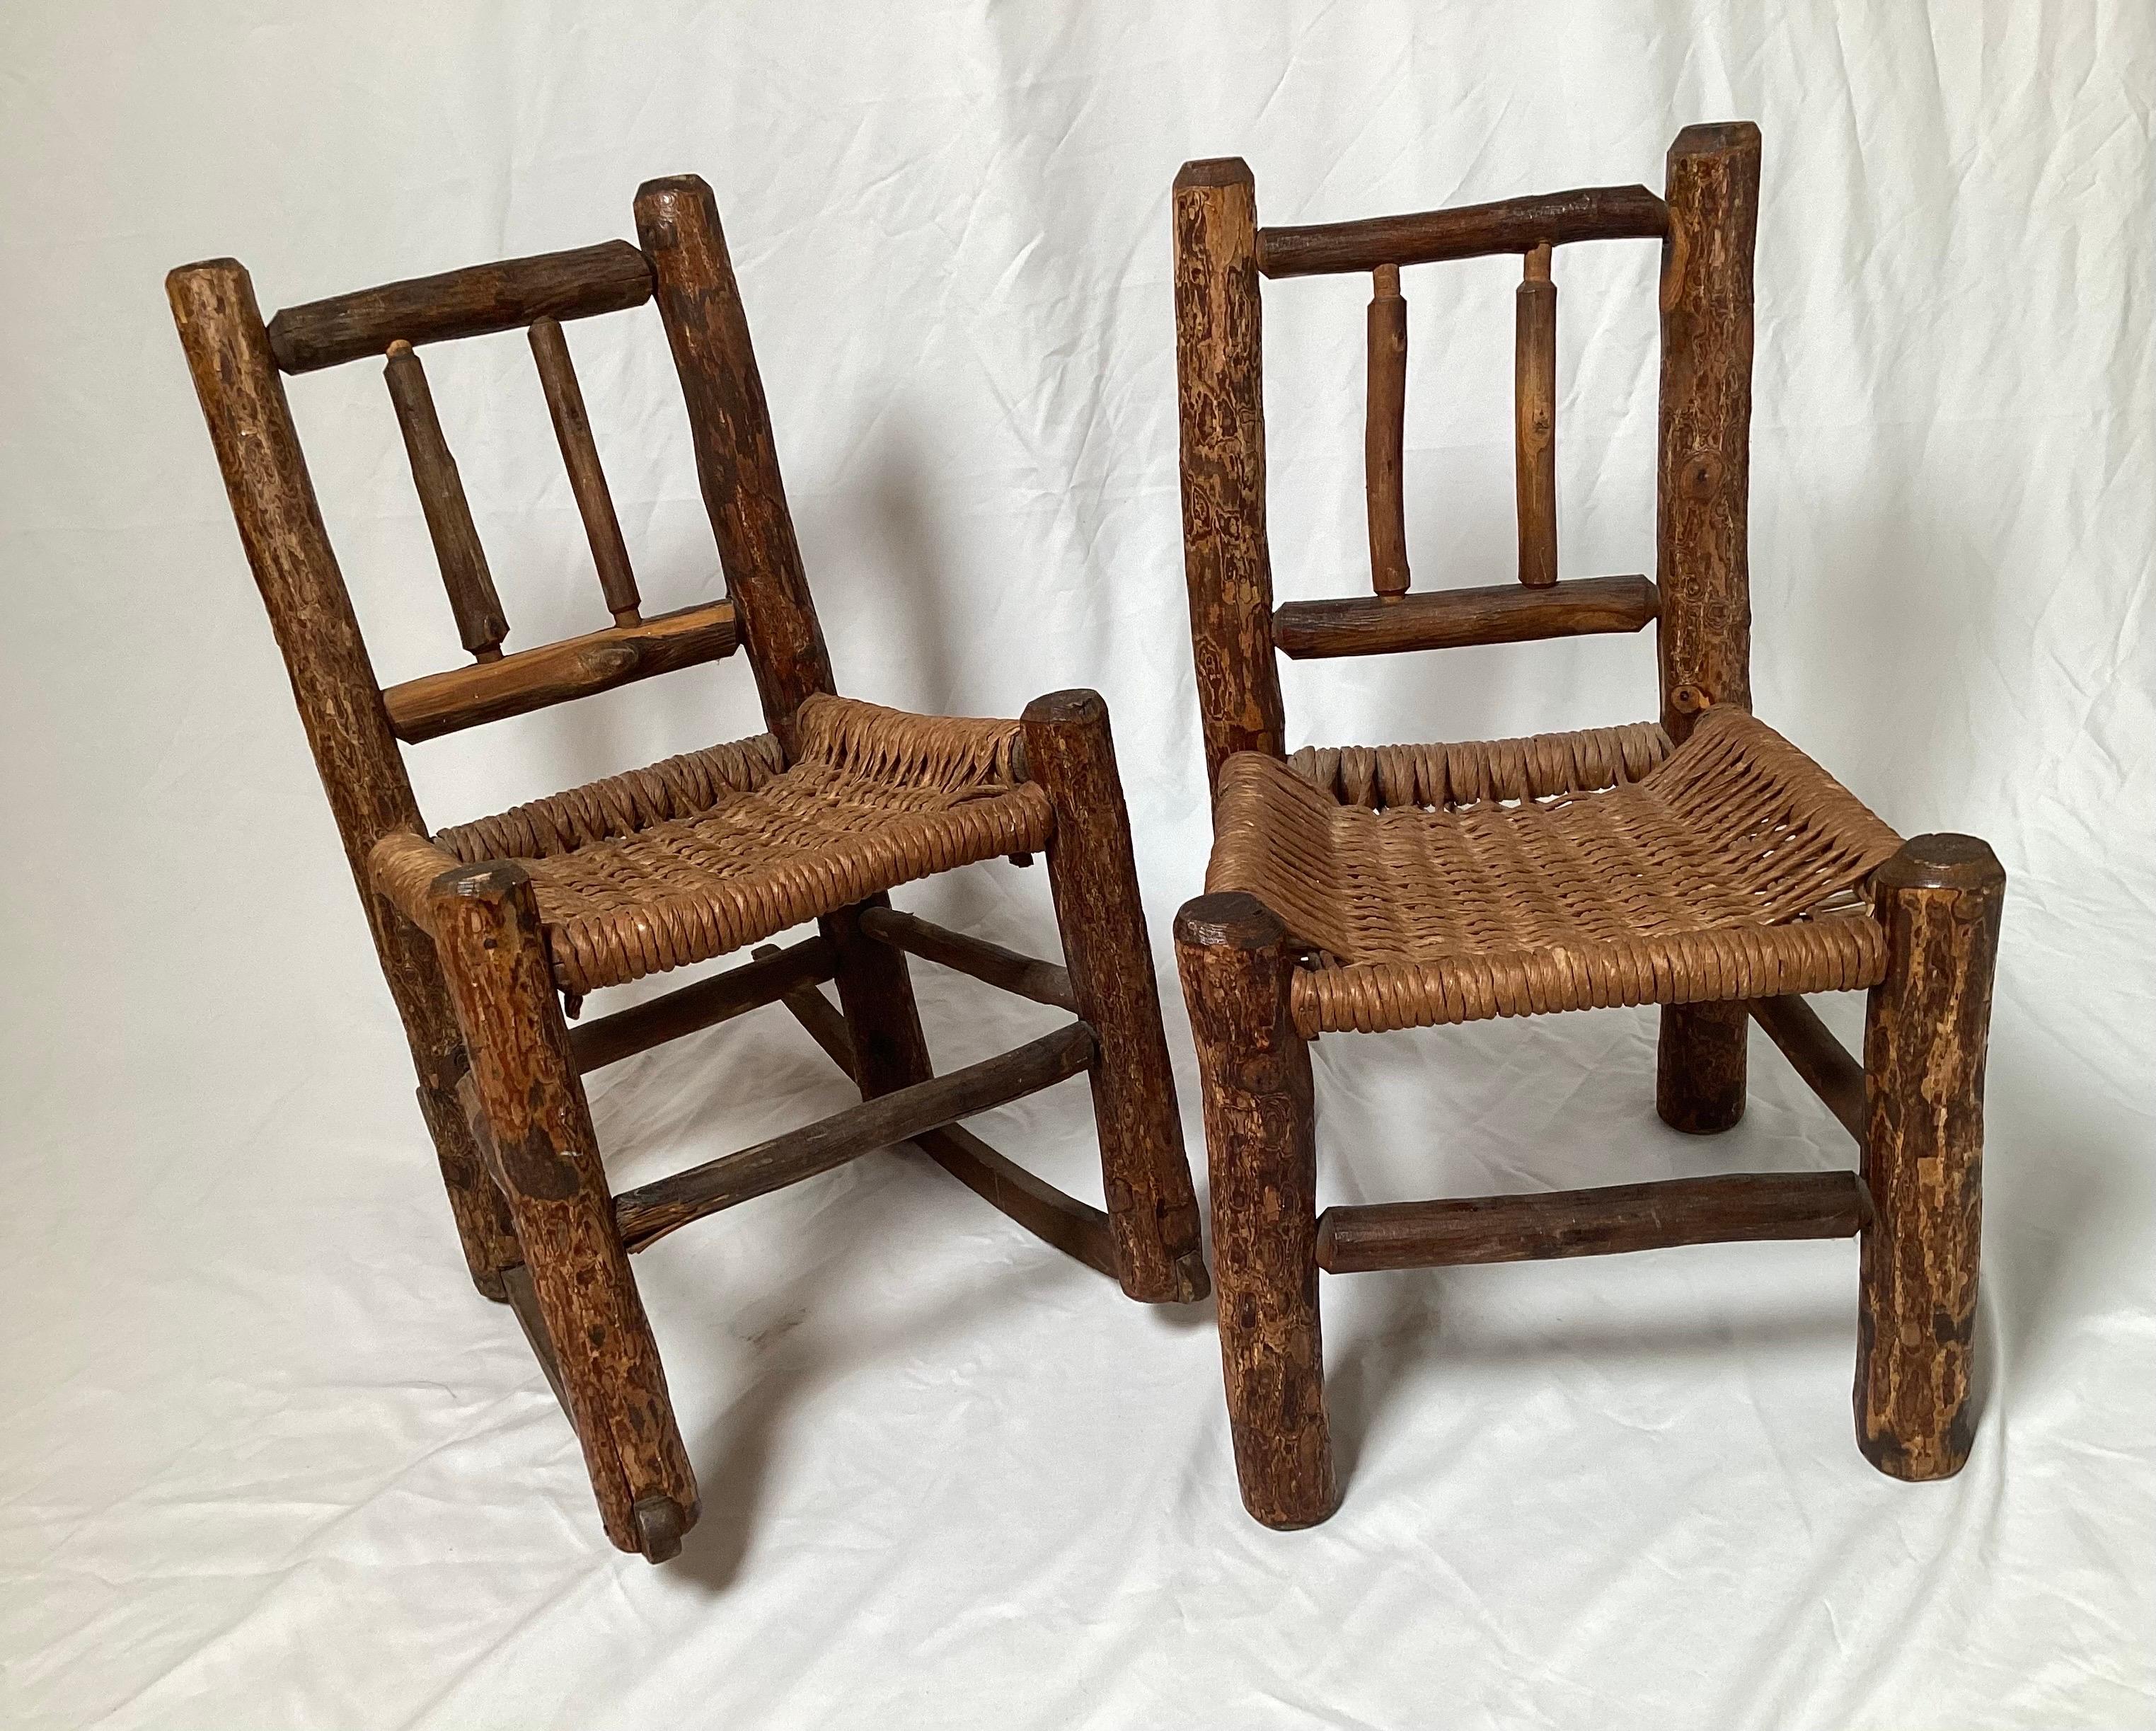 A set of 19th century Children's Adirondack chairs. The set includes one child's rocker and one child's side chair. The frame is made of lags with bark and the seats and back of woven rush